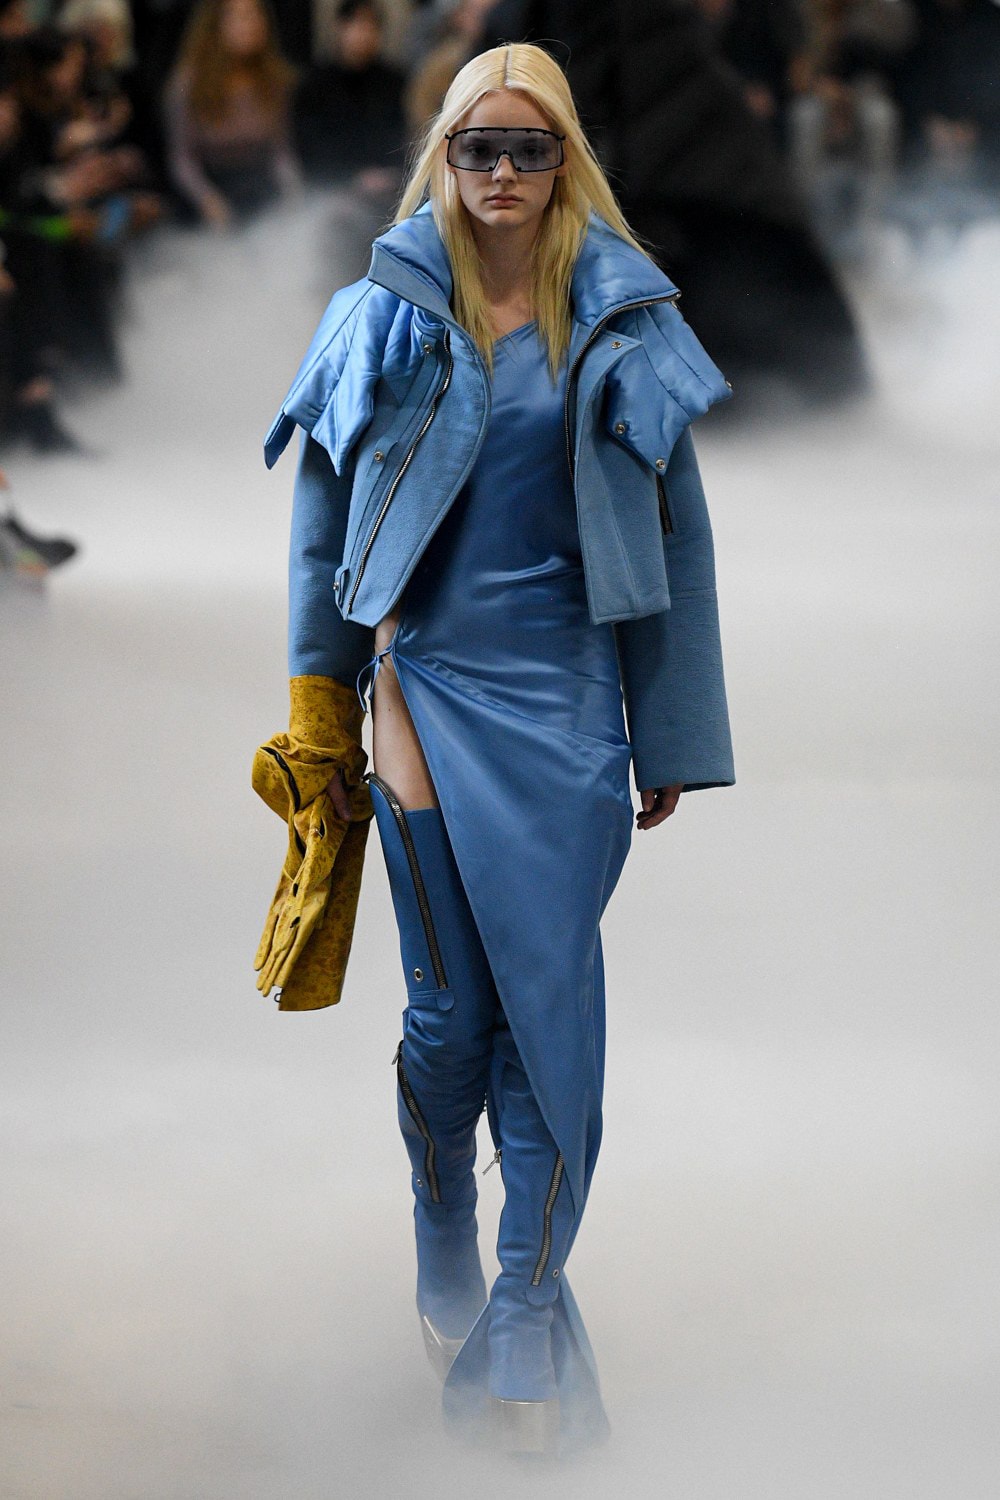 Rick Owens Fall/Winter 2020 Collection Runway Show Leather Jacket Dress Blue